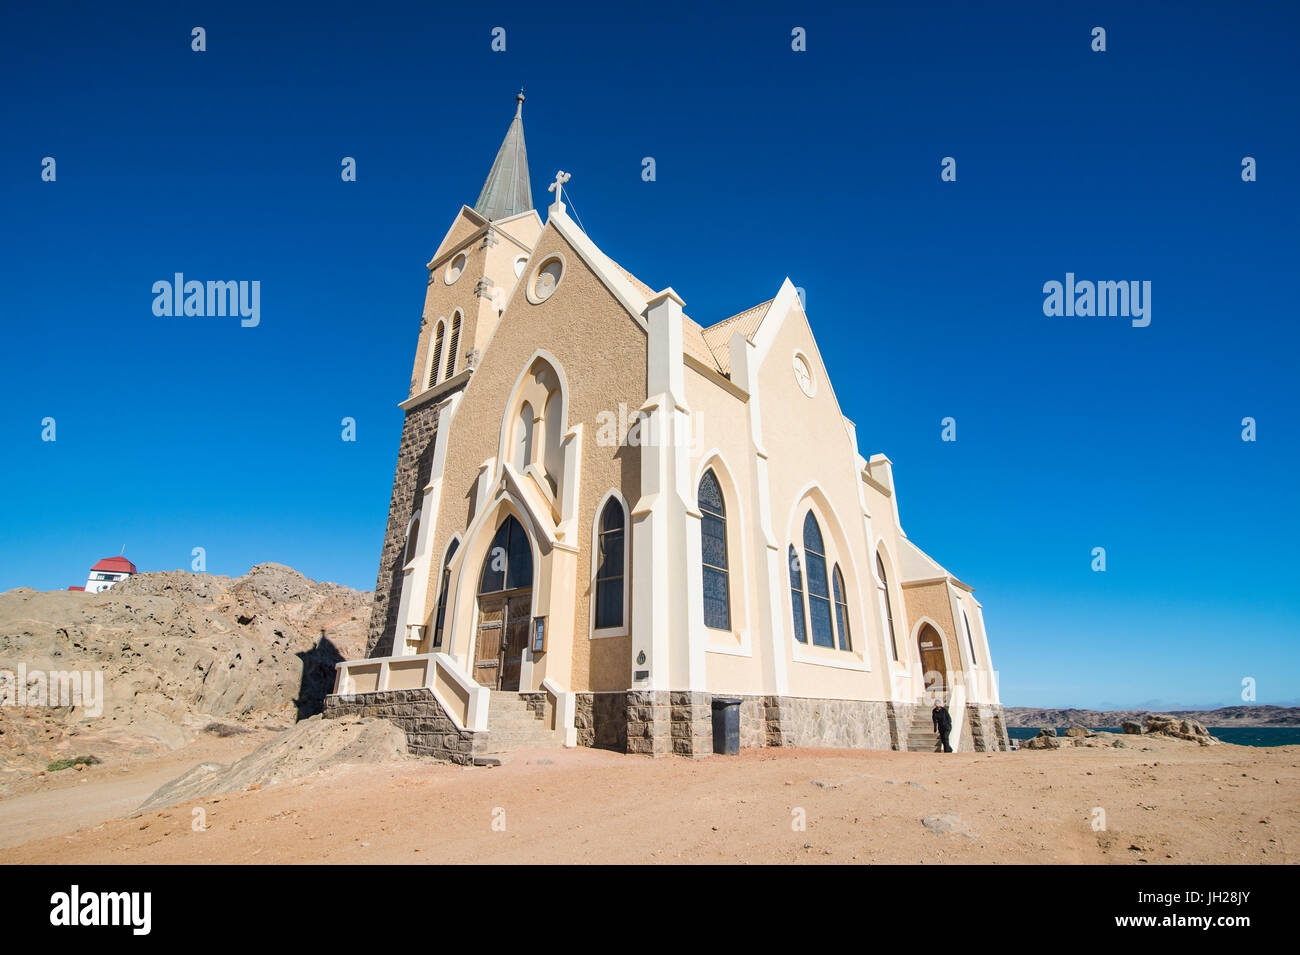 Famous Felsenkirche, a colonial church, Luderitz, Namibia, Africa Stock Photo